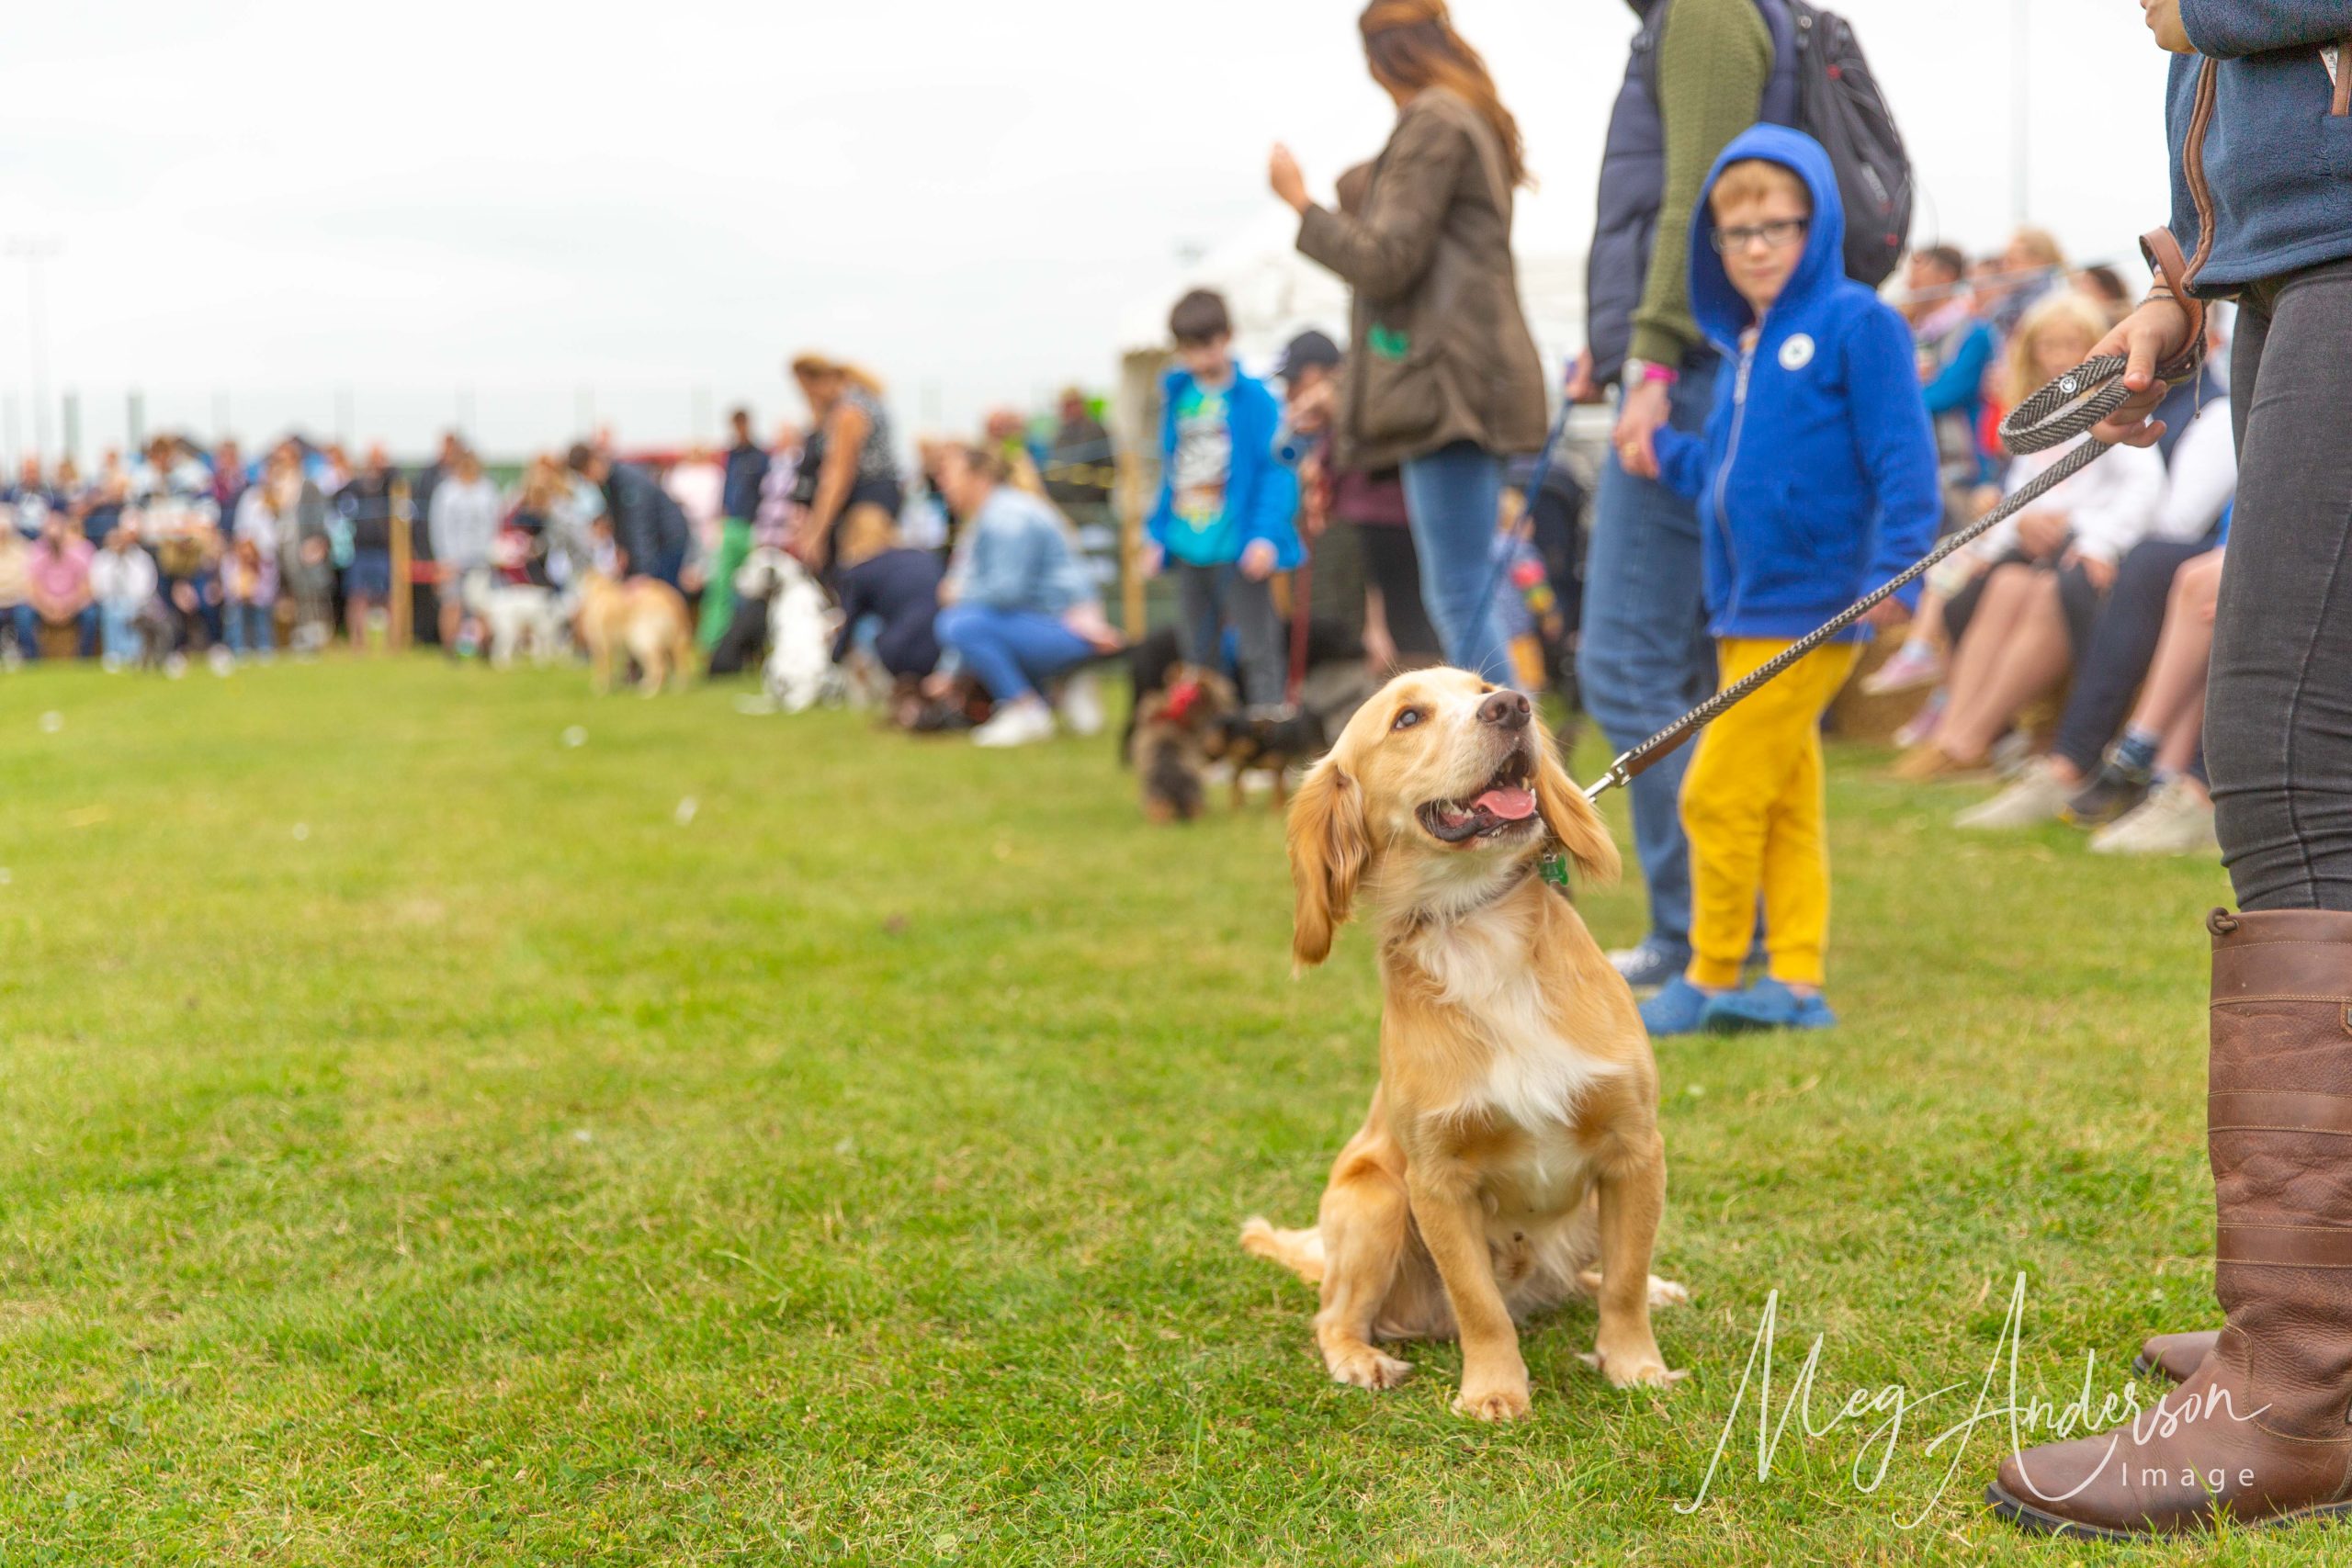 A dog looking towards its owner with a large crowd behind